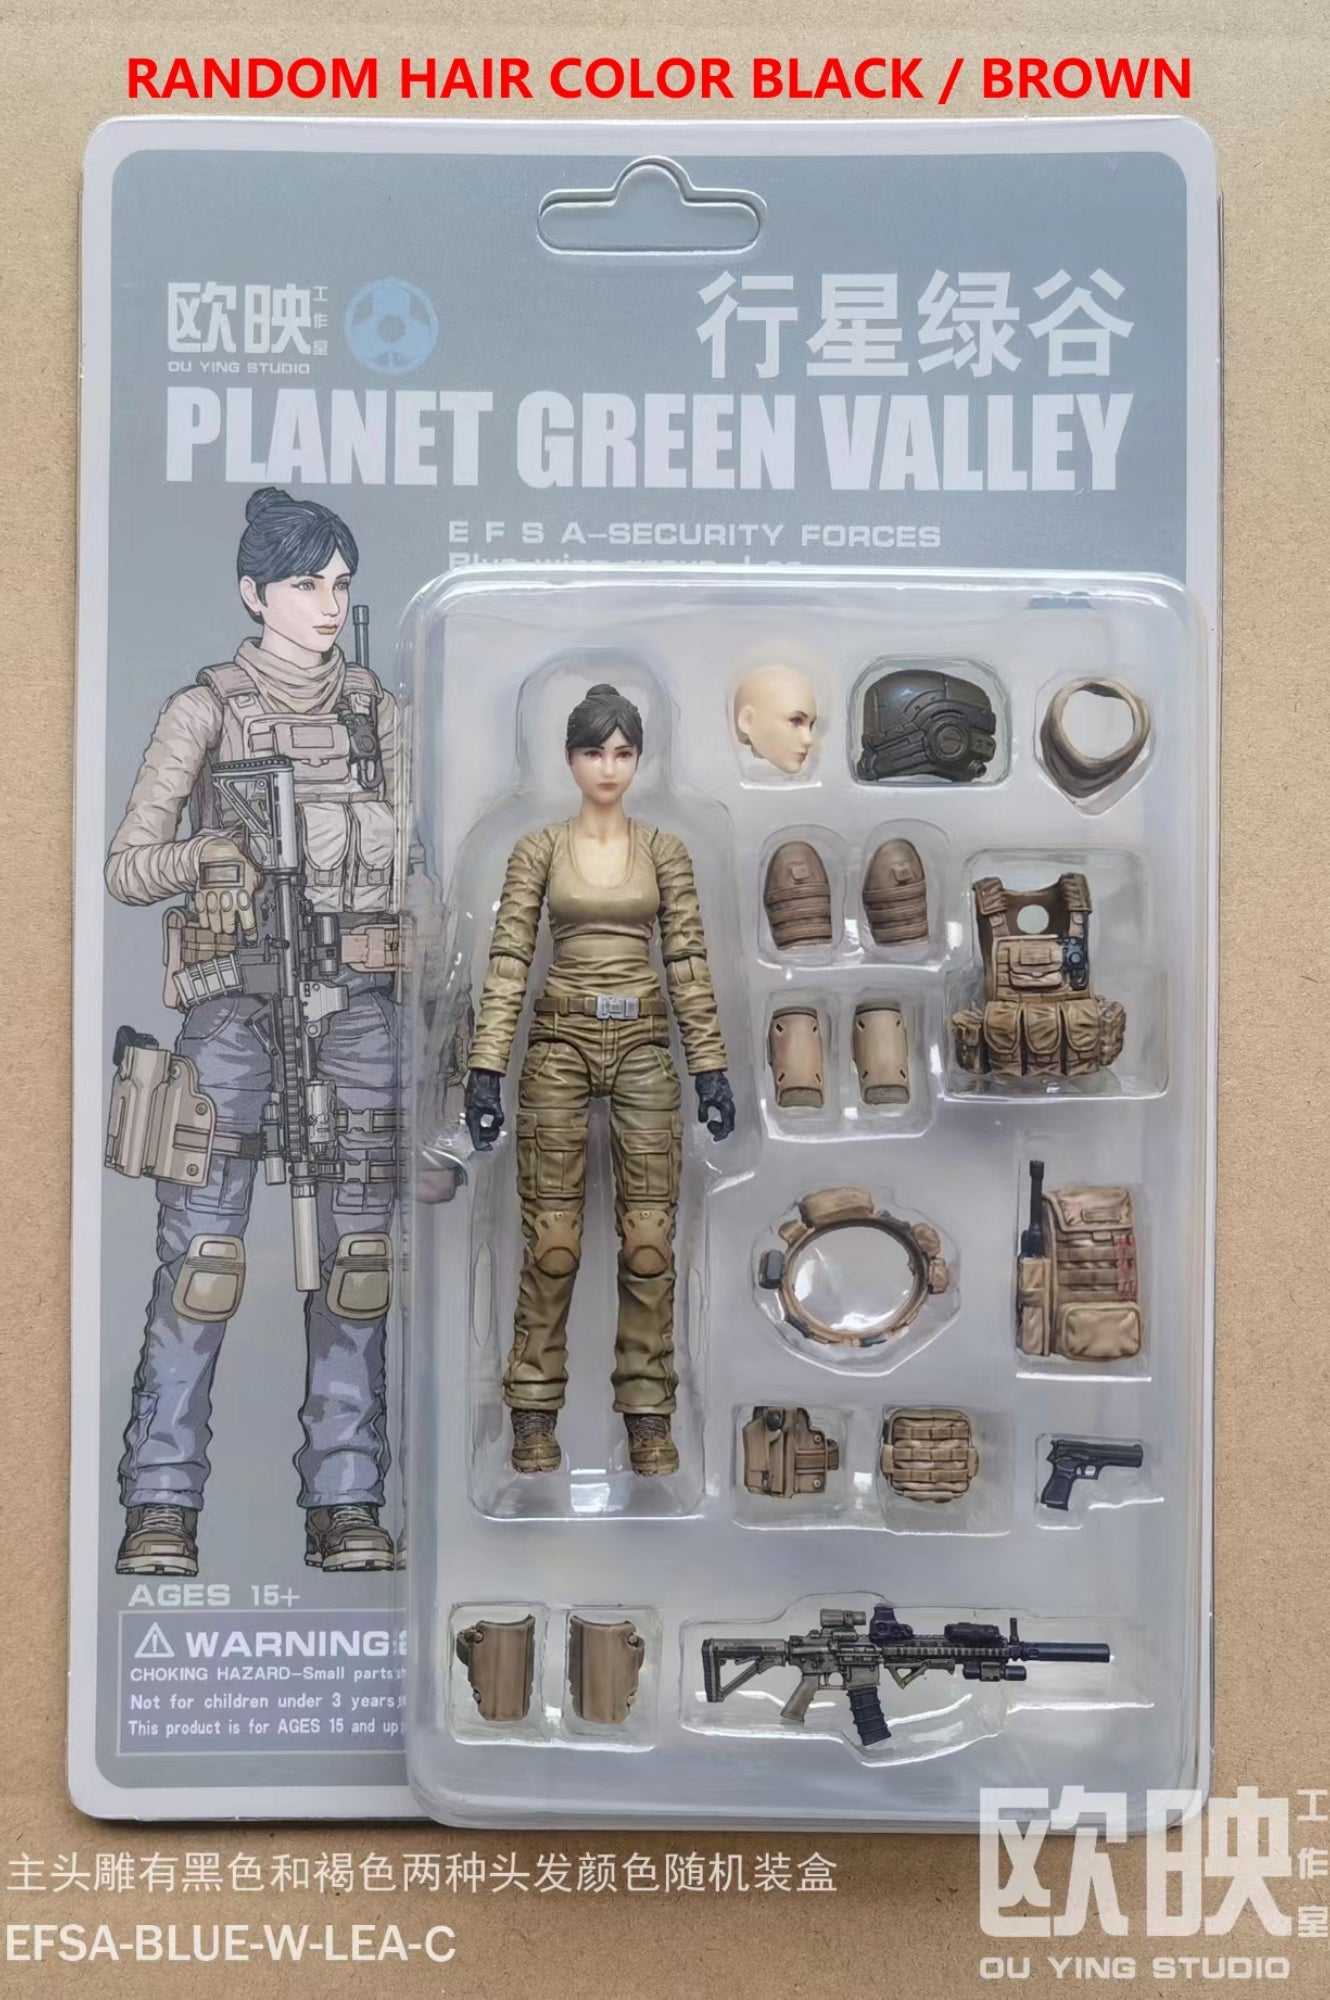 EFSA - Security Forces Blue Wing Group - LEA-C 1/18 Action Figure By Planet Green Valley